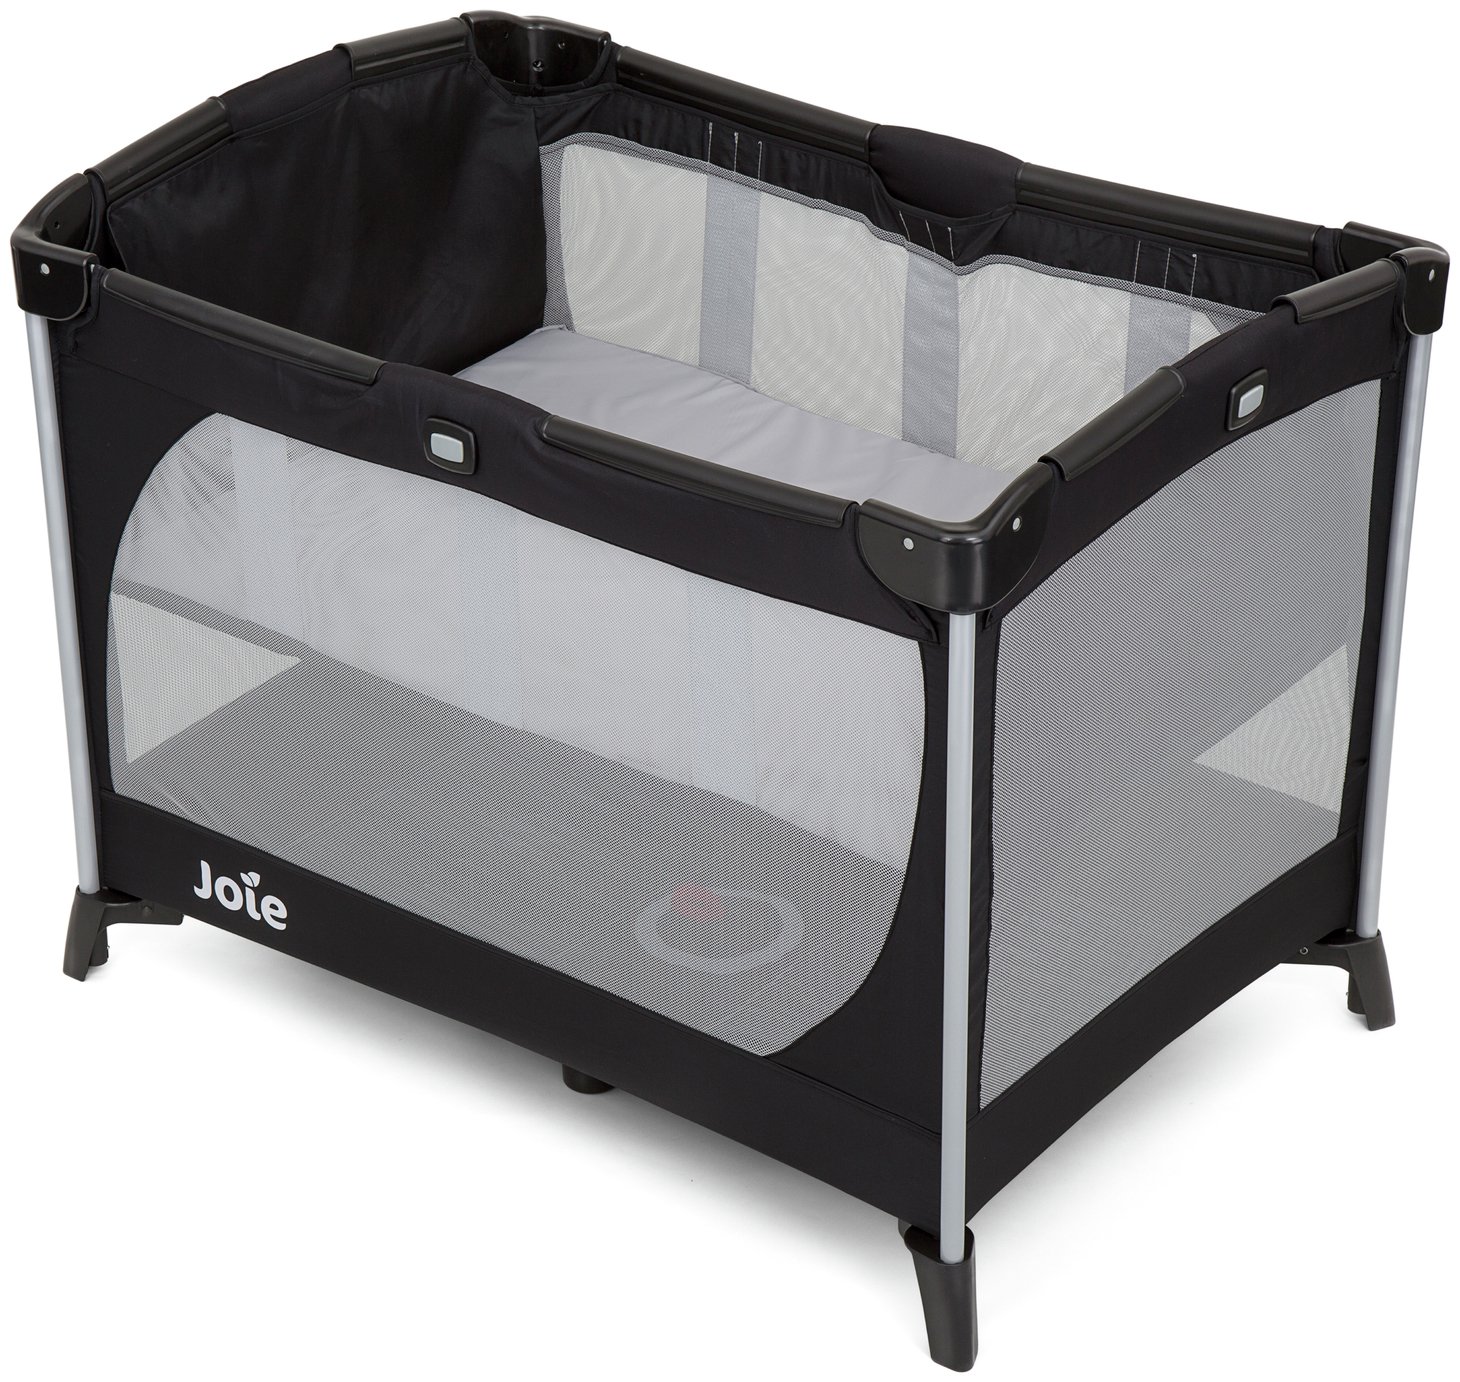 Joie Allura Travel Cot with Bassinet